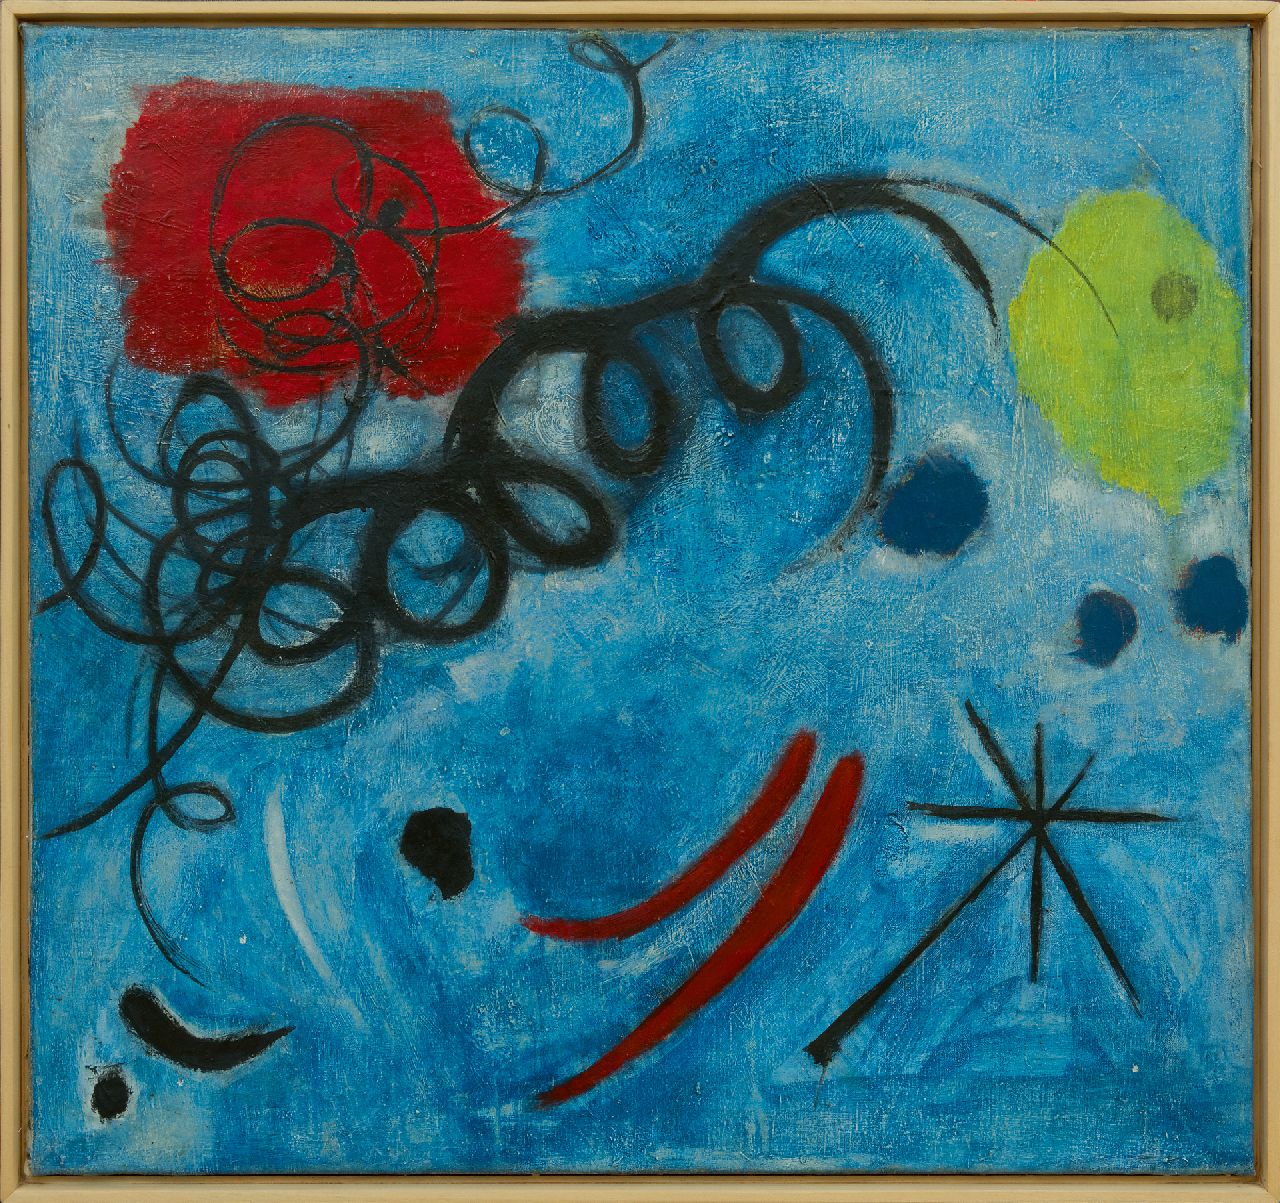 Wolvecamp Th.W.  | 'Theo' Wilhelm Wolvecamp | Paintings offered for sale | Compostion in Blue, oil on canvas 74.4 x 79.7 cm, signed on the reverse and painted ca. 1949